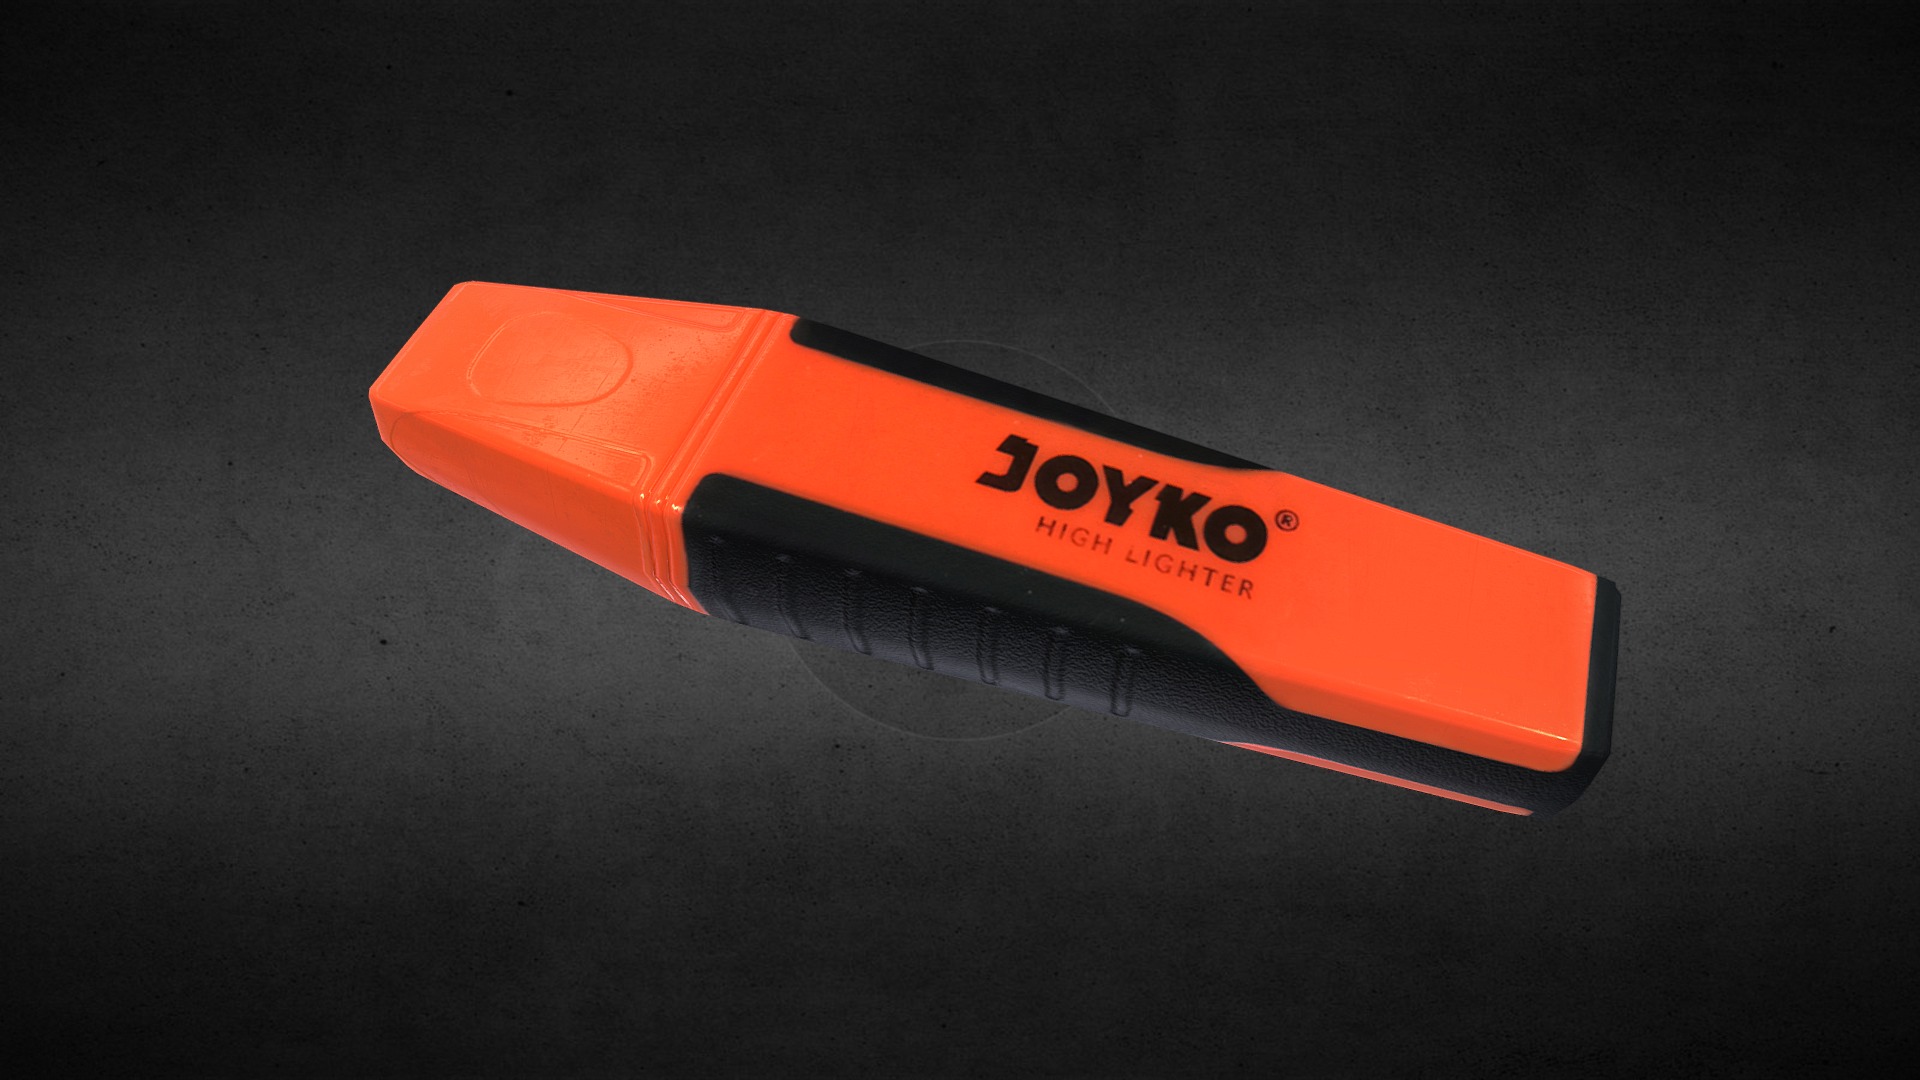 3D model Lowpoly Joyko Highlighter HL-5 - This is a 3D model of the Lowpoly Joyko Highlighter HL-5. The 3D model is about an orange and black stapler.